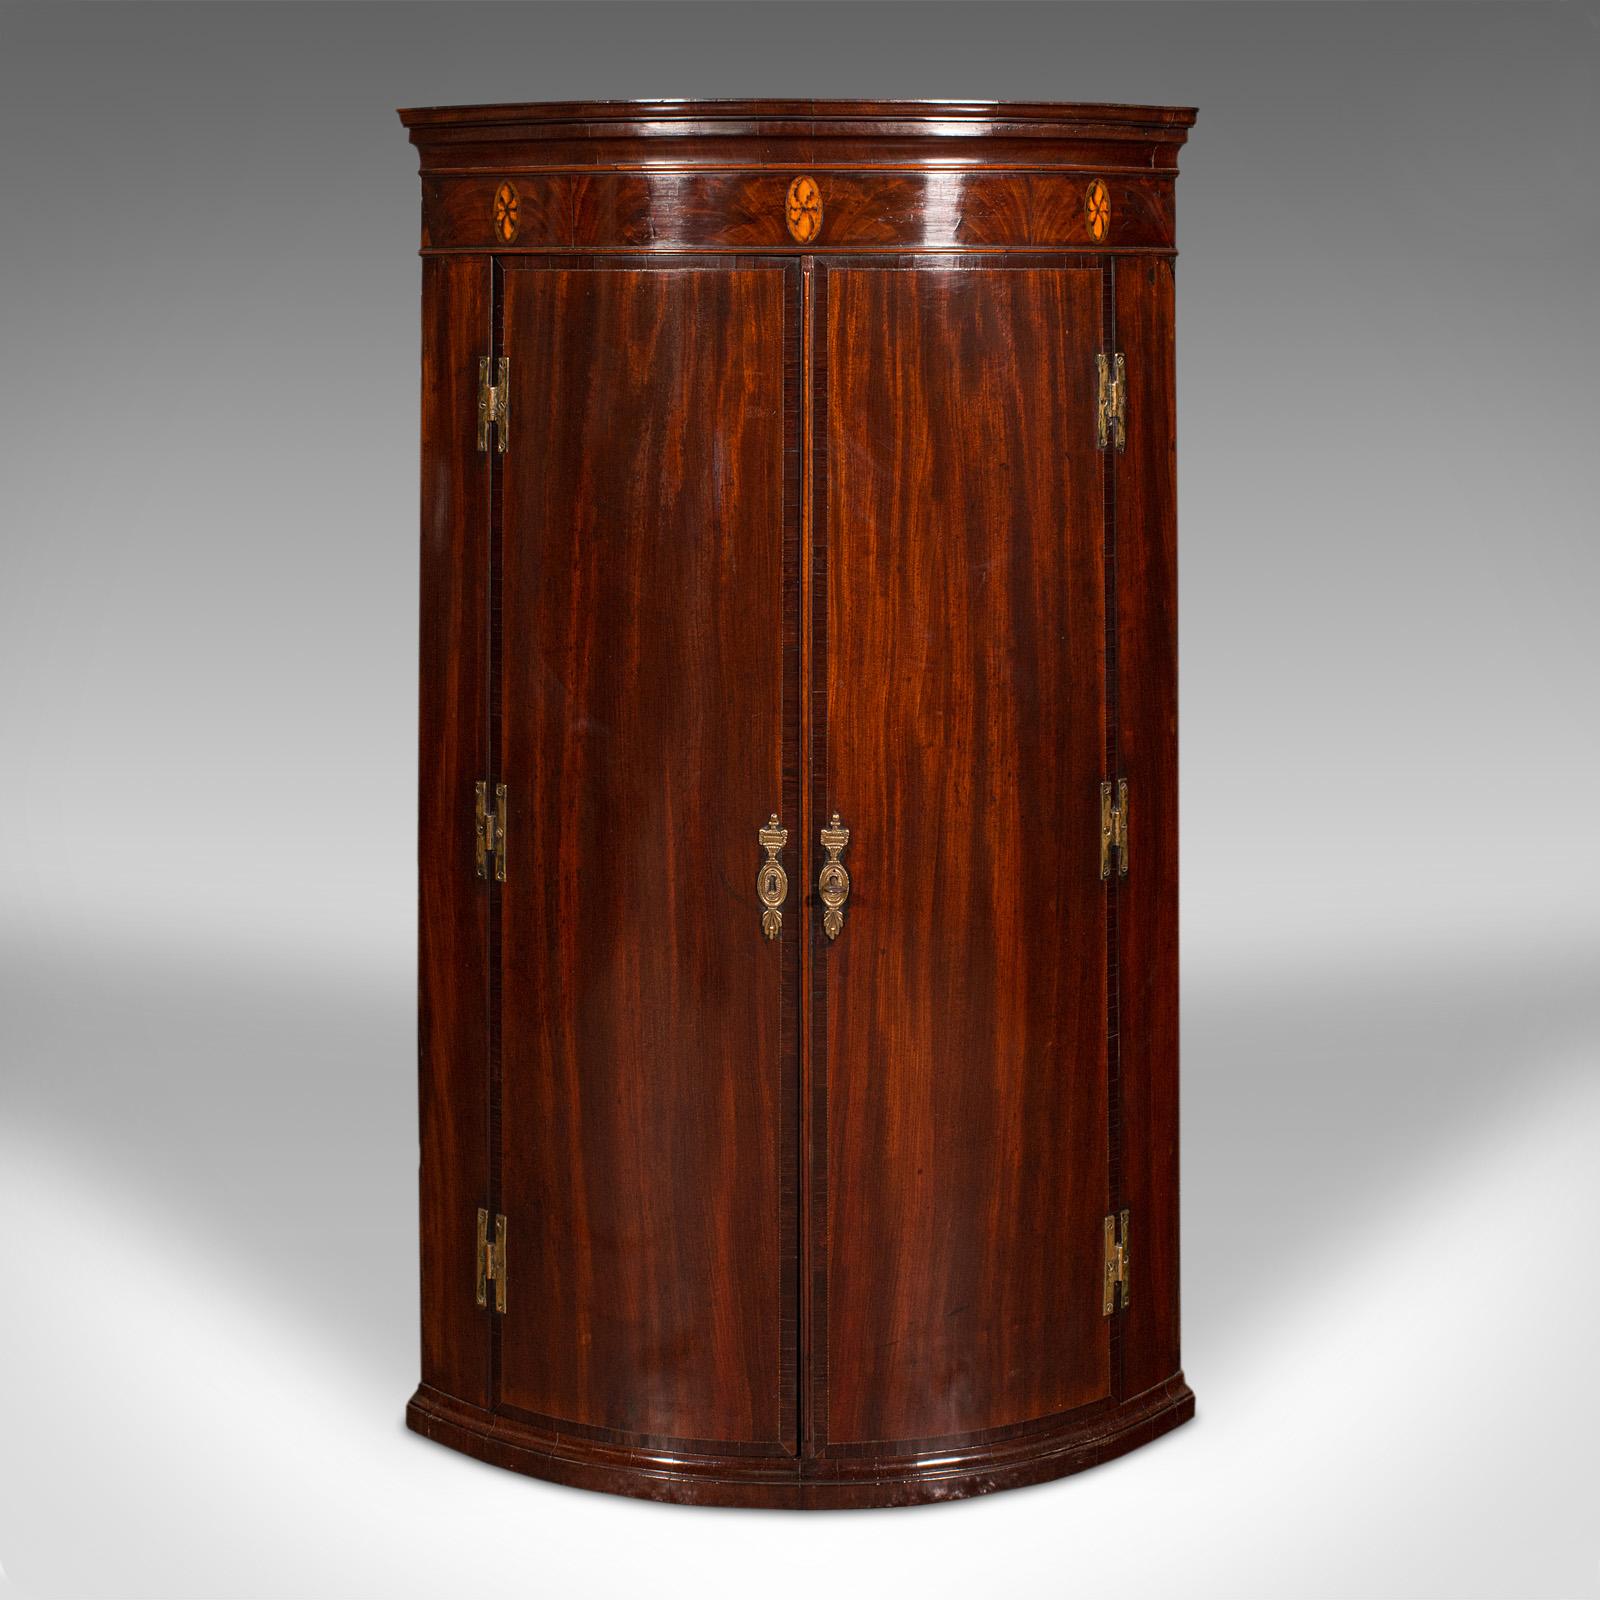 This is an antique bow front corner cabinet. An English, flame mahogany and oak wall cupboard, dating to the Georgian period, circa 1780.

Exquisite craftsmanship sets apart this superb cabinet from George III's reign
Displays a desirable aged